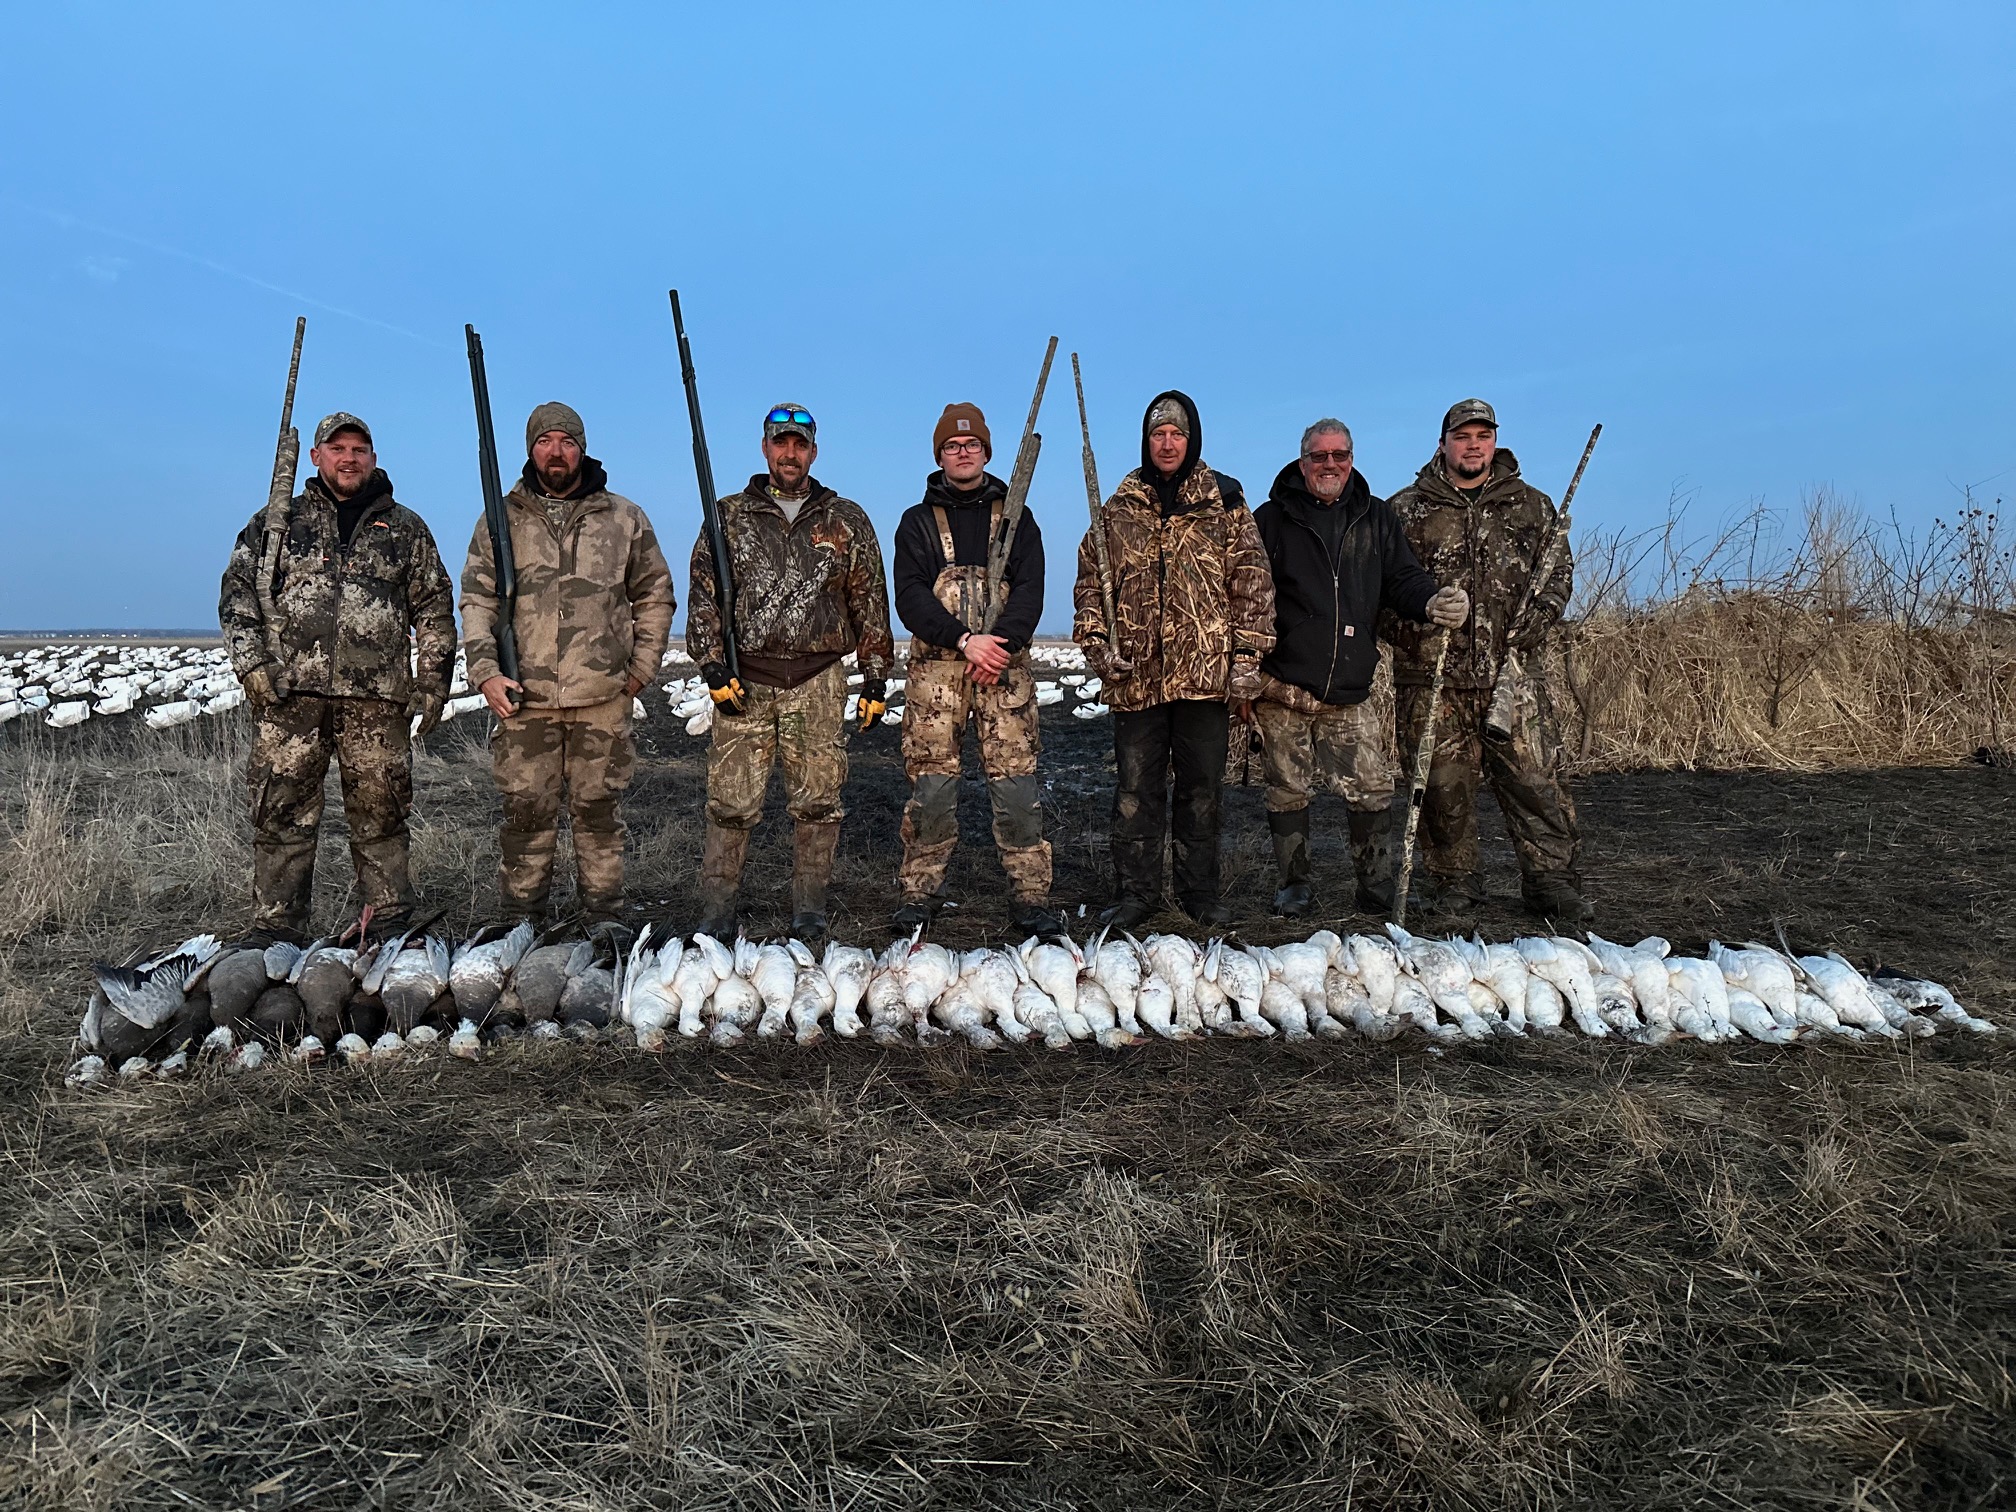 Whiteout Outfitters Spring Snow Goose Hunts spring-snow-goose-hunts-whiteout-outfitters-022523-5.jpg